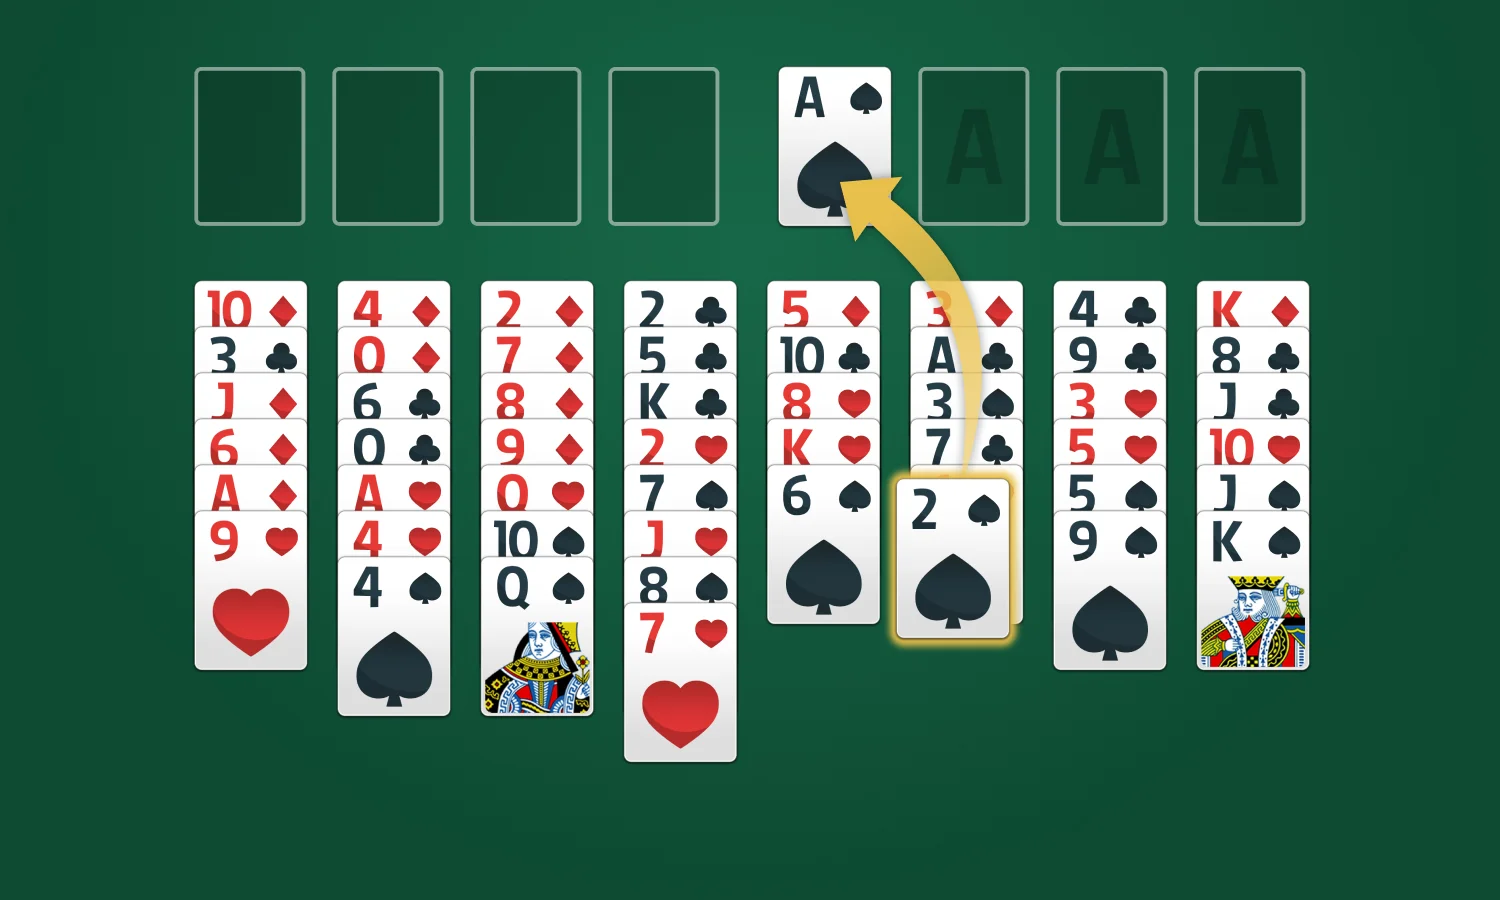 FreeCell Solitaire Rules: Step 2